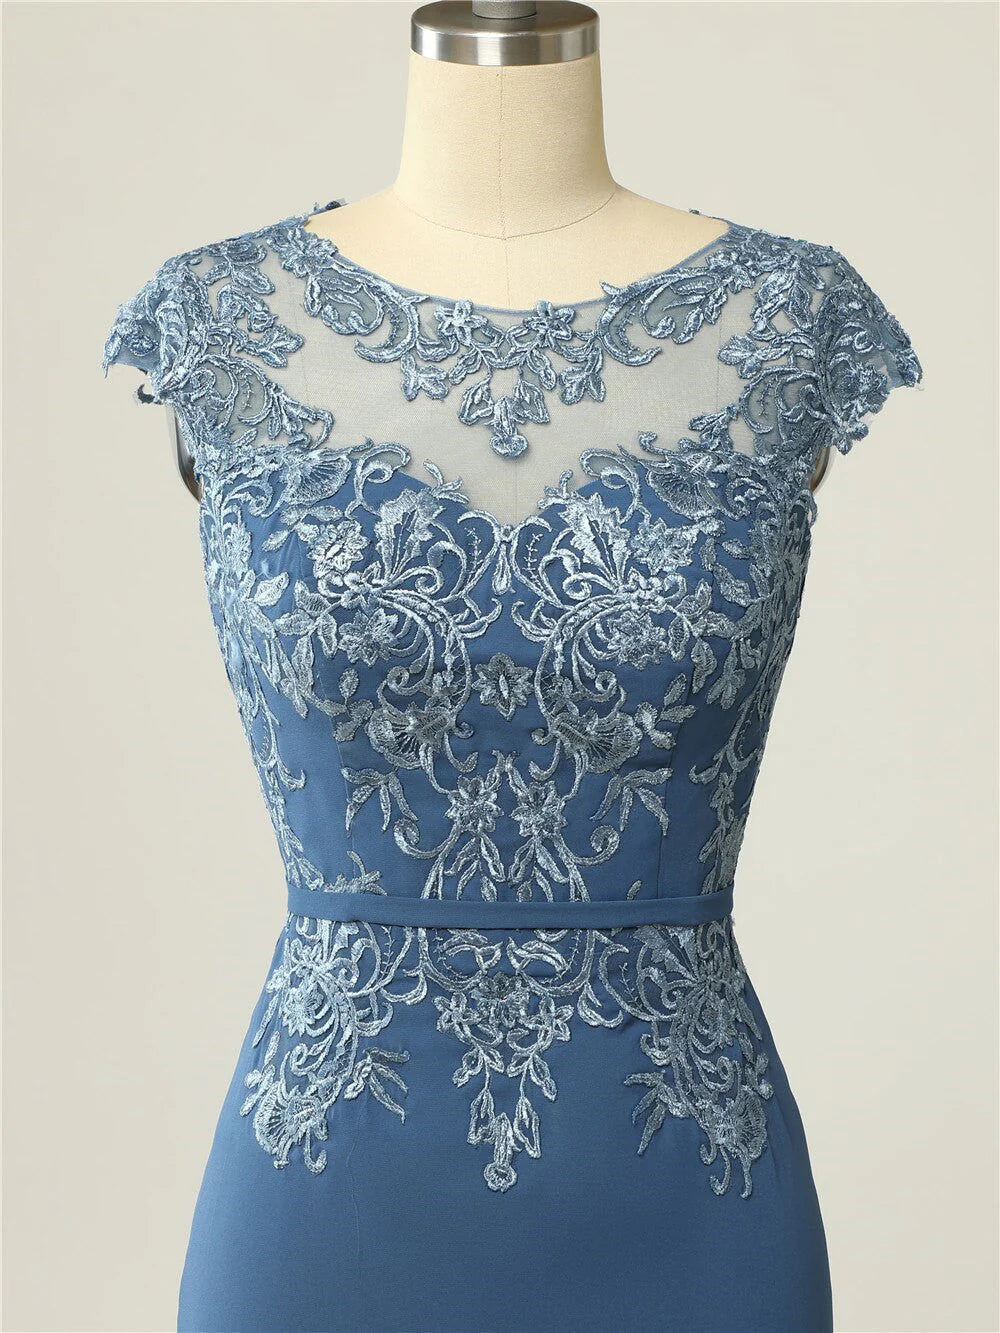 Sheath Scoop Lace Navy Blue Mother Of The Bride Dresses With Jacket Cap Sleeves